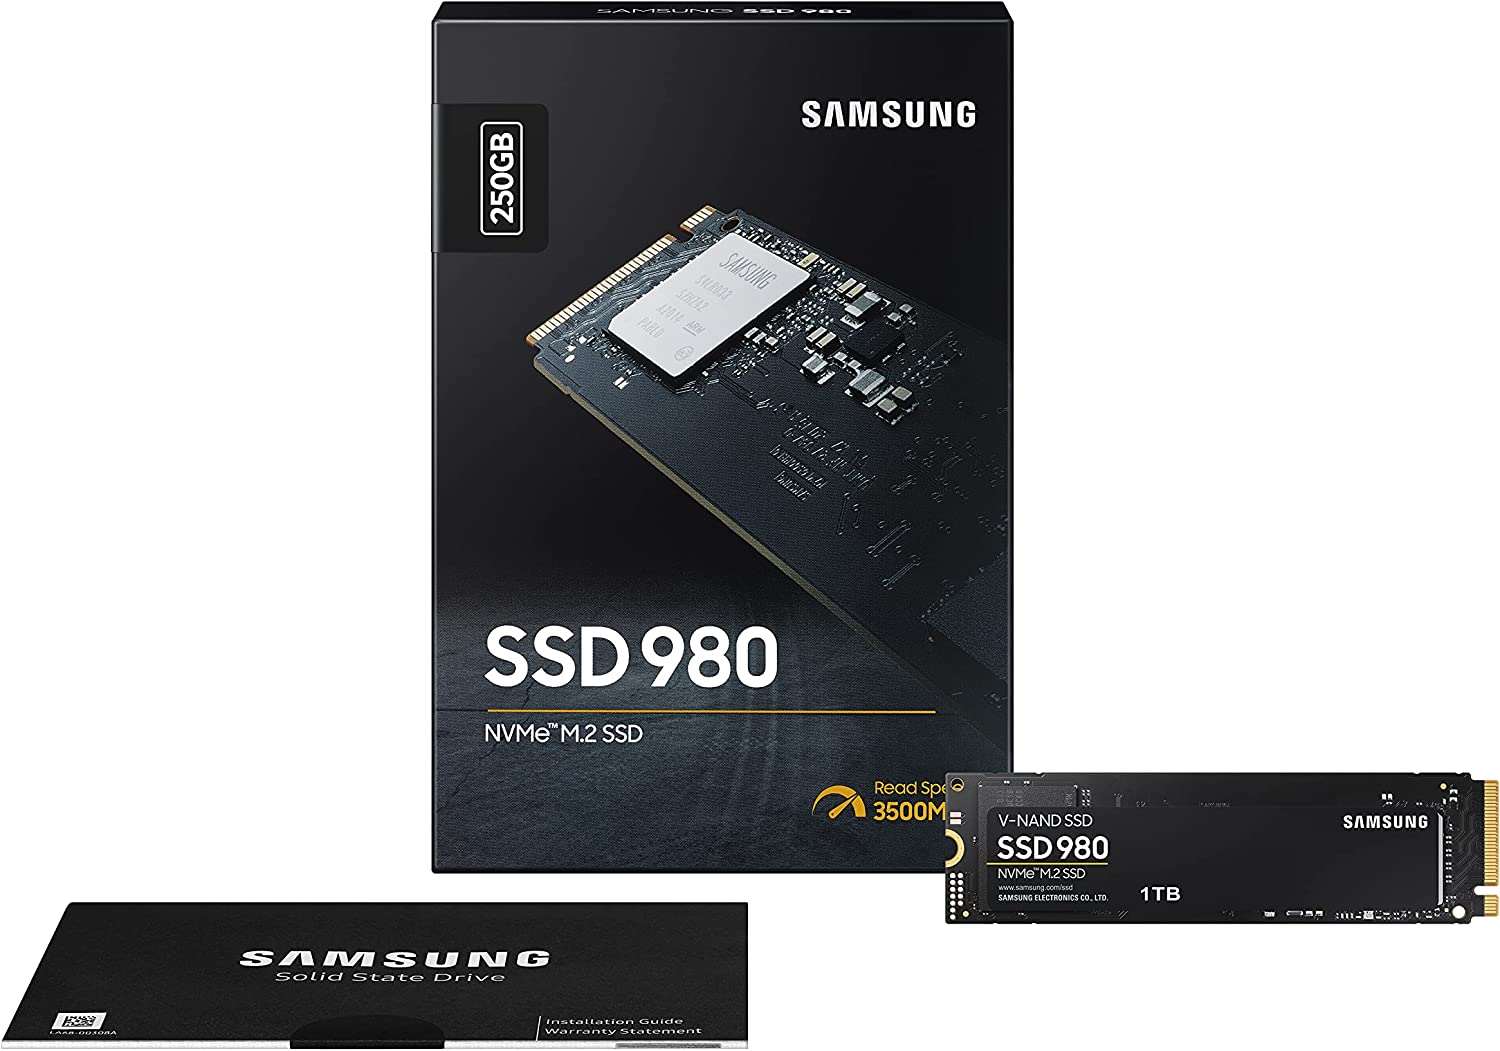 Samsung 980 NVMe M.2 Solid State Drive, Black, 3500mb/s read speed SSD